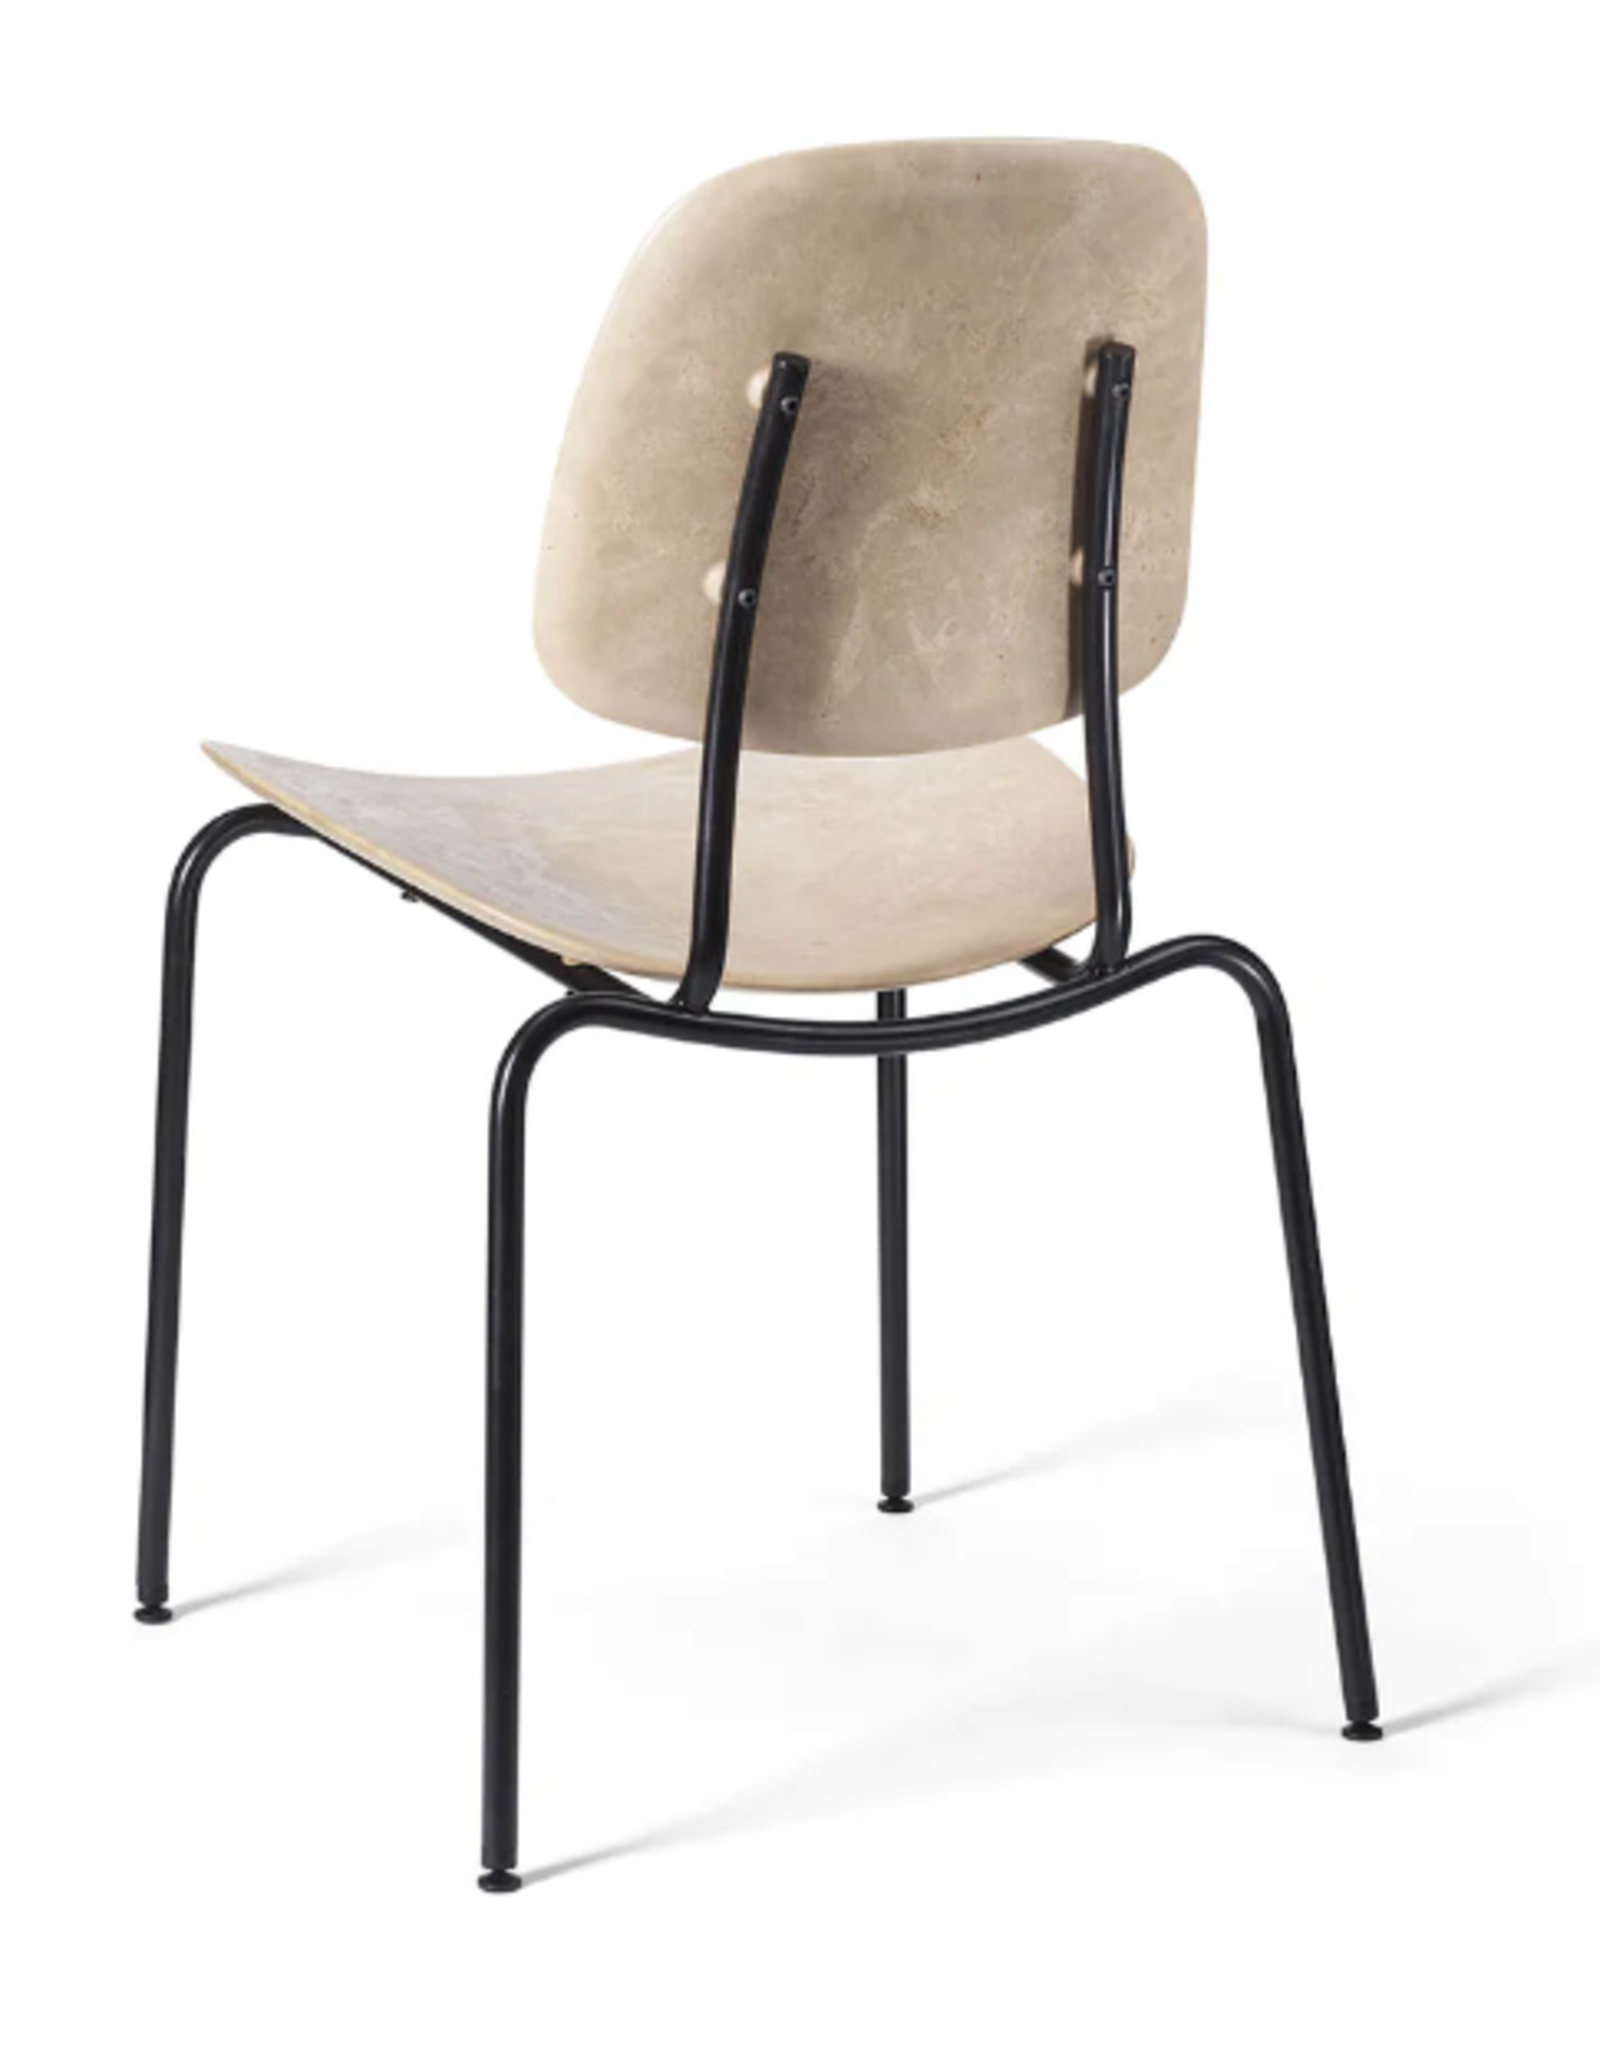 COMPOUND DINING CHAIR IN WOOD WASTE GREY